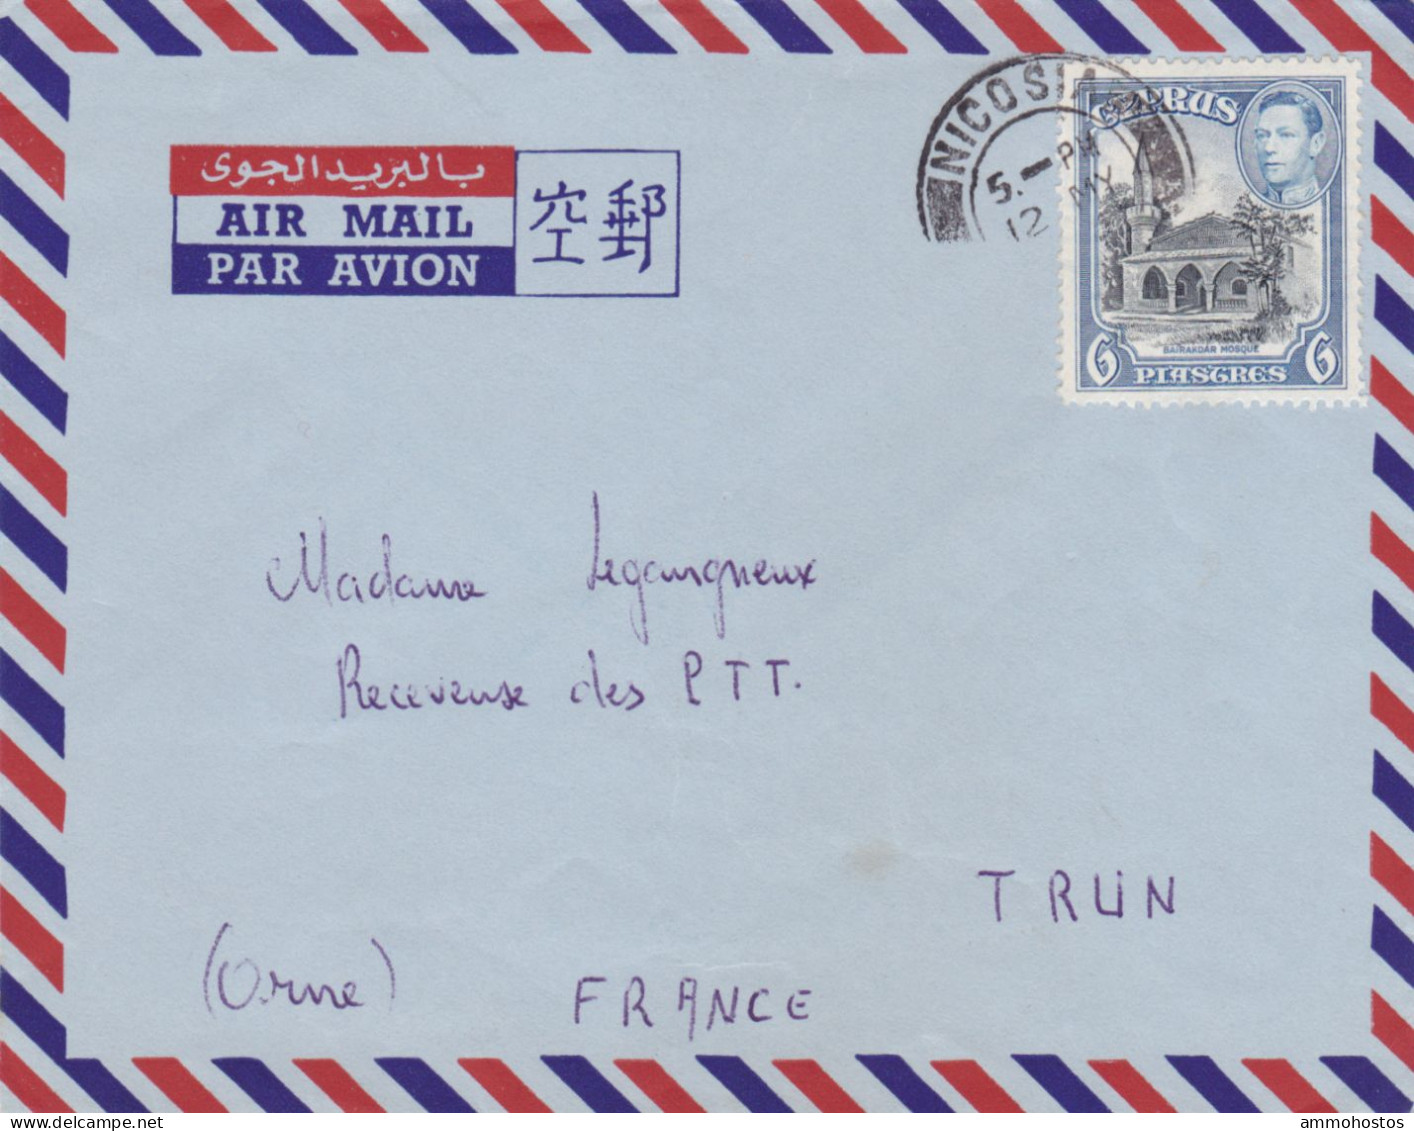 CYPRUS KGVI AIRMAIL COVER NICOSIA FRANCE 6 PIASTRE RATE - Cipro (...-1960)